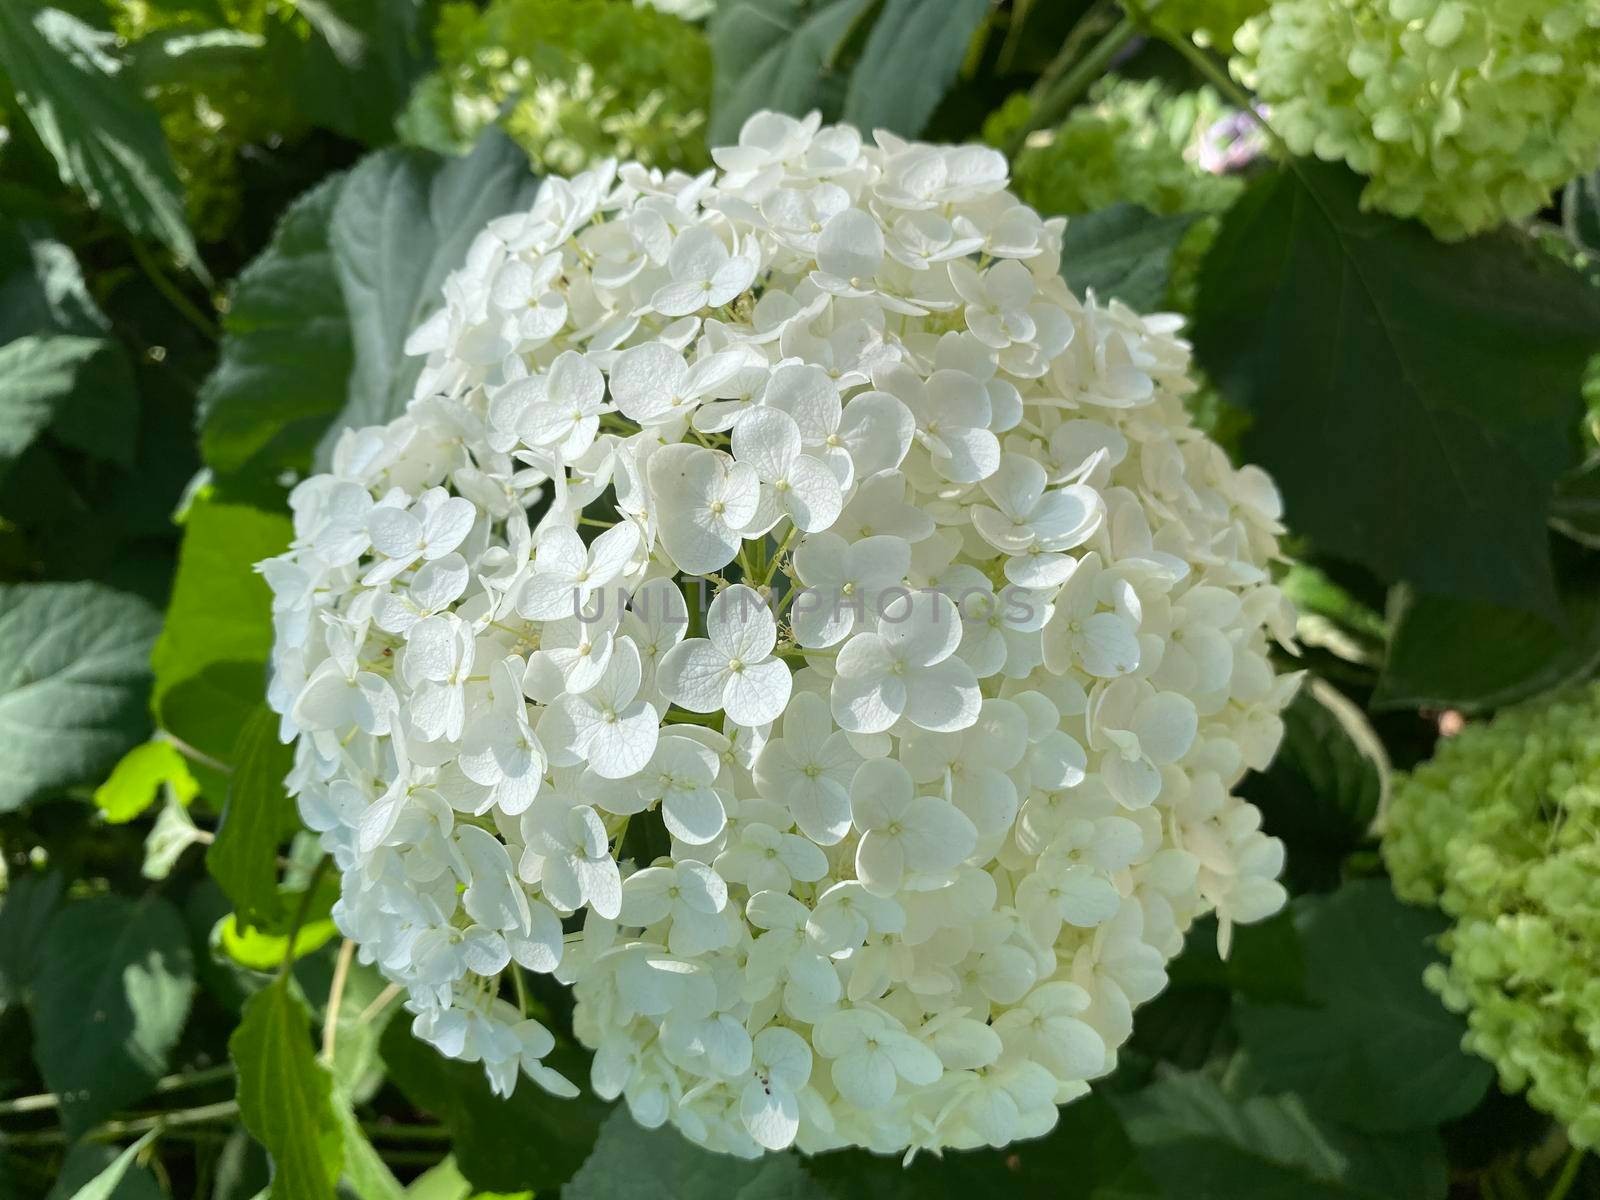 White hydrangea - Snowball tree. Hydrangea flowers are very unique. This flower can change color, ranging from white, red, to purple. Color changes in hydrangeas indicate the natural pH levels in the soil content.